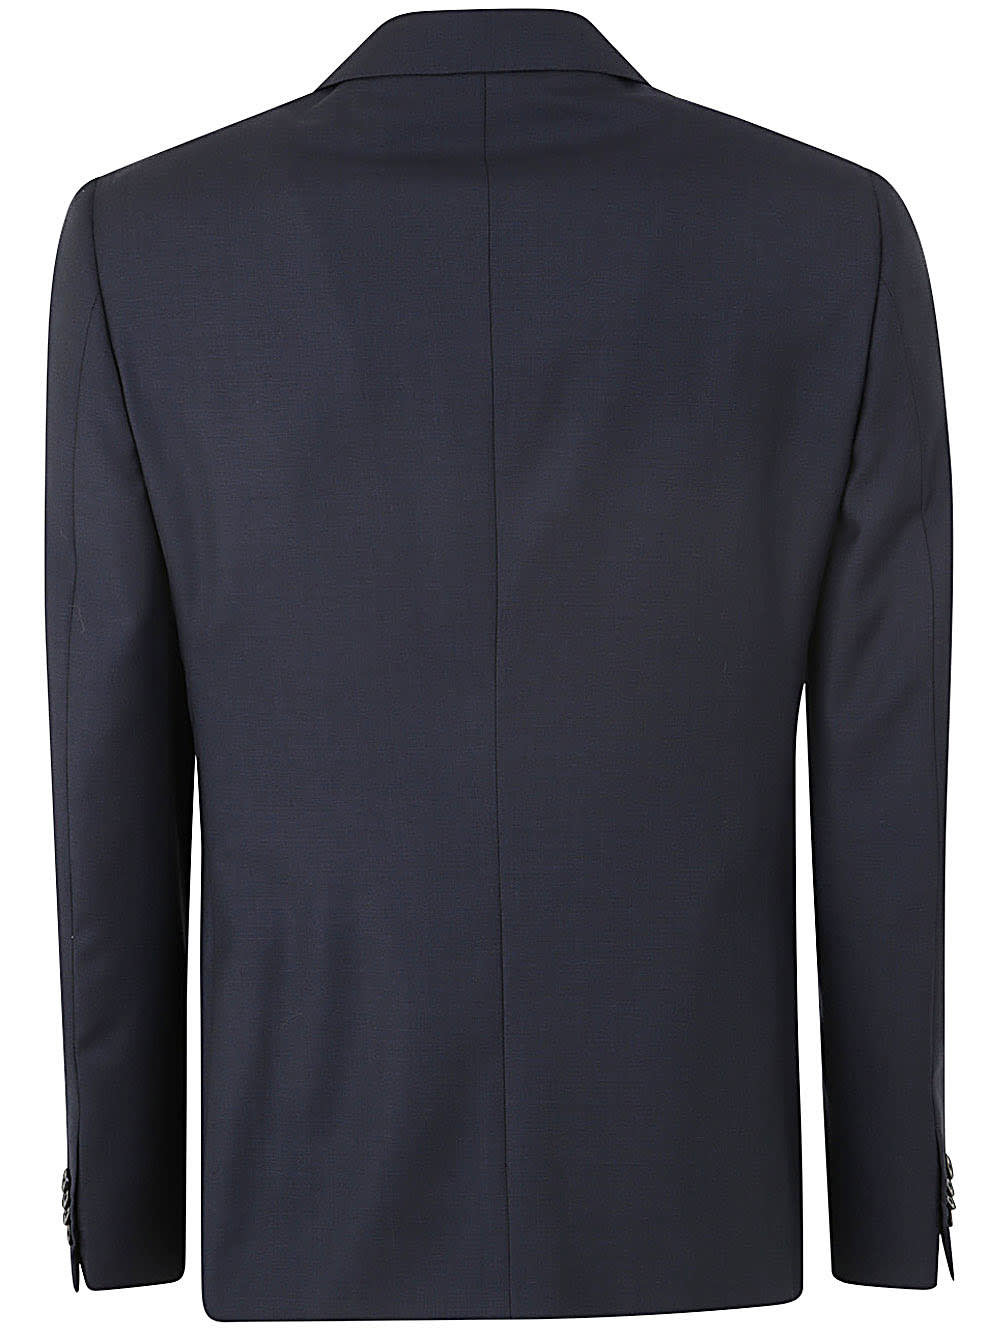 Shop Zegna Pure Wool Suit In Blue